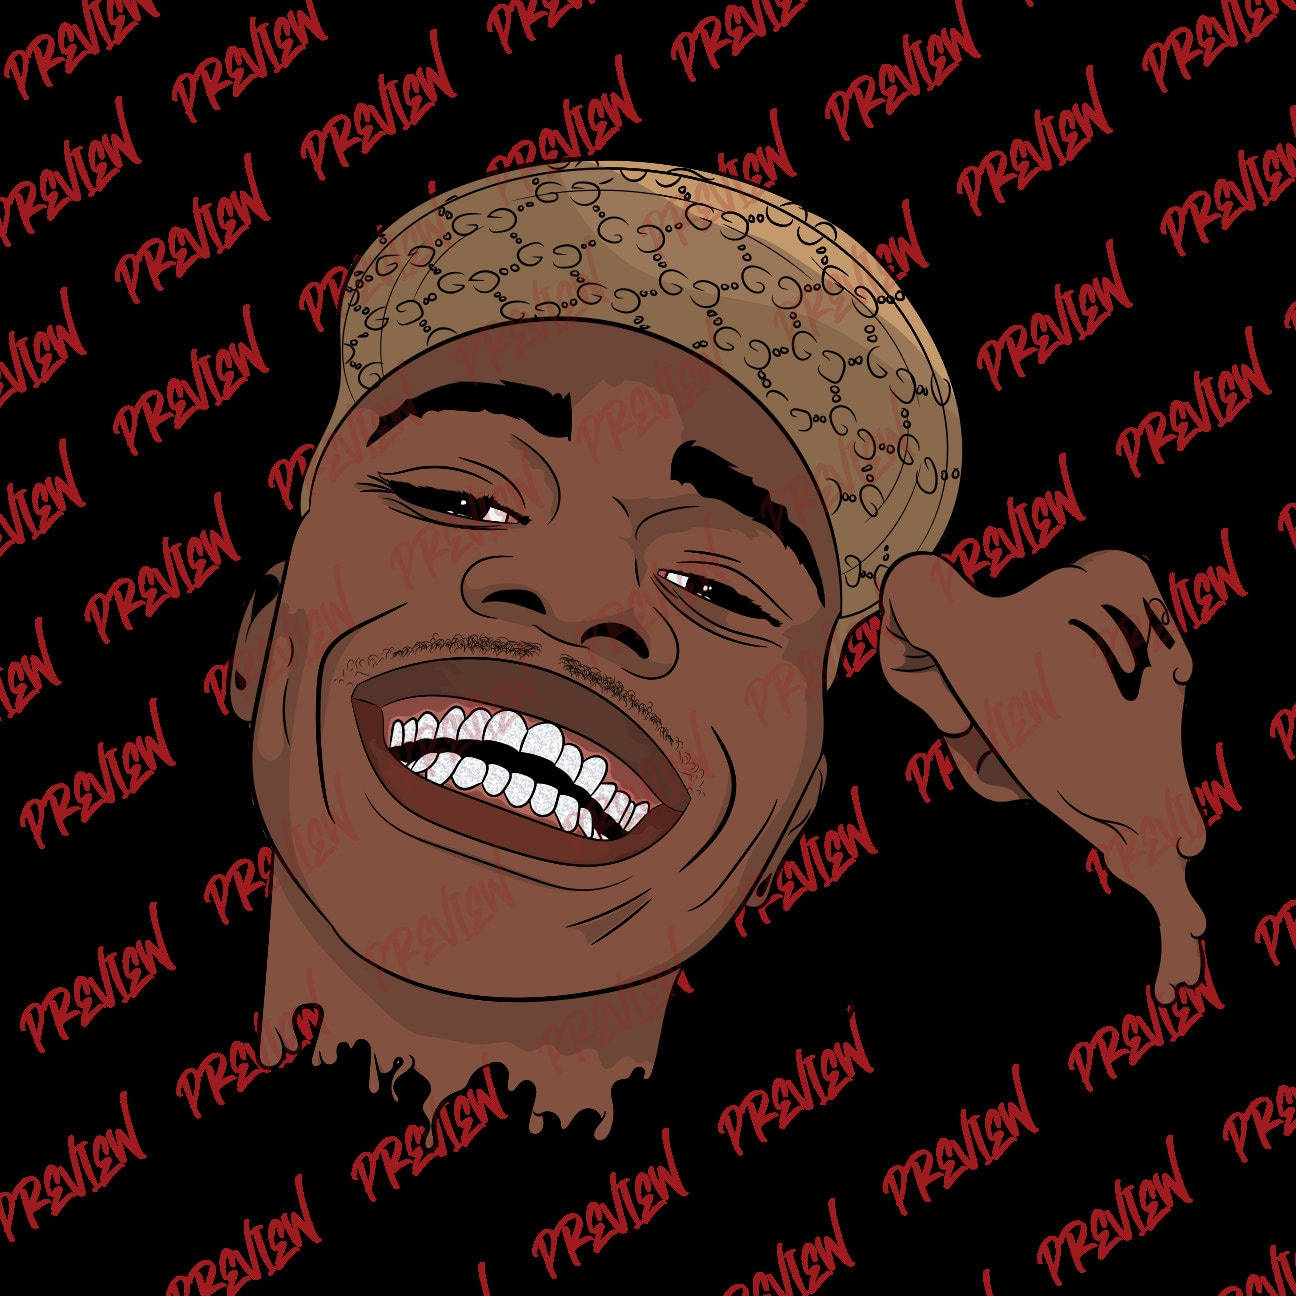 NBA Youngboy Cartoon - A playful image of musical artist NBA Youngboy in a cartoon illustration Wallpaper